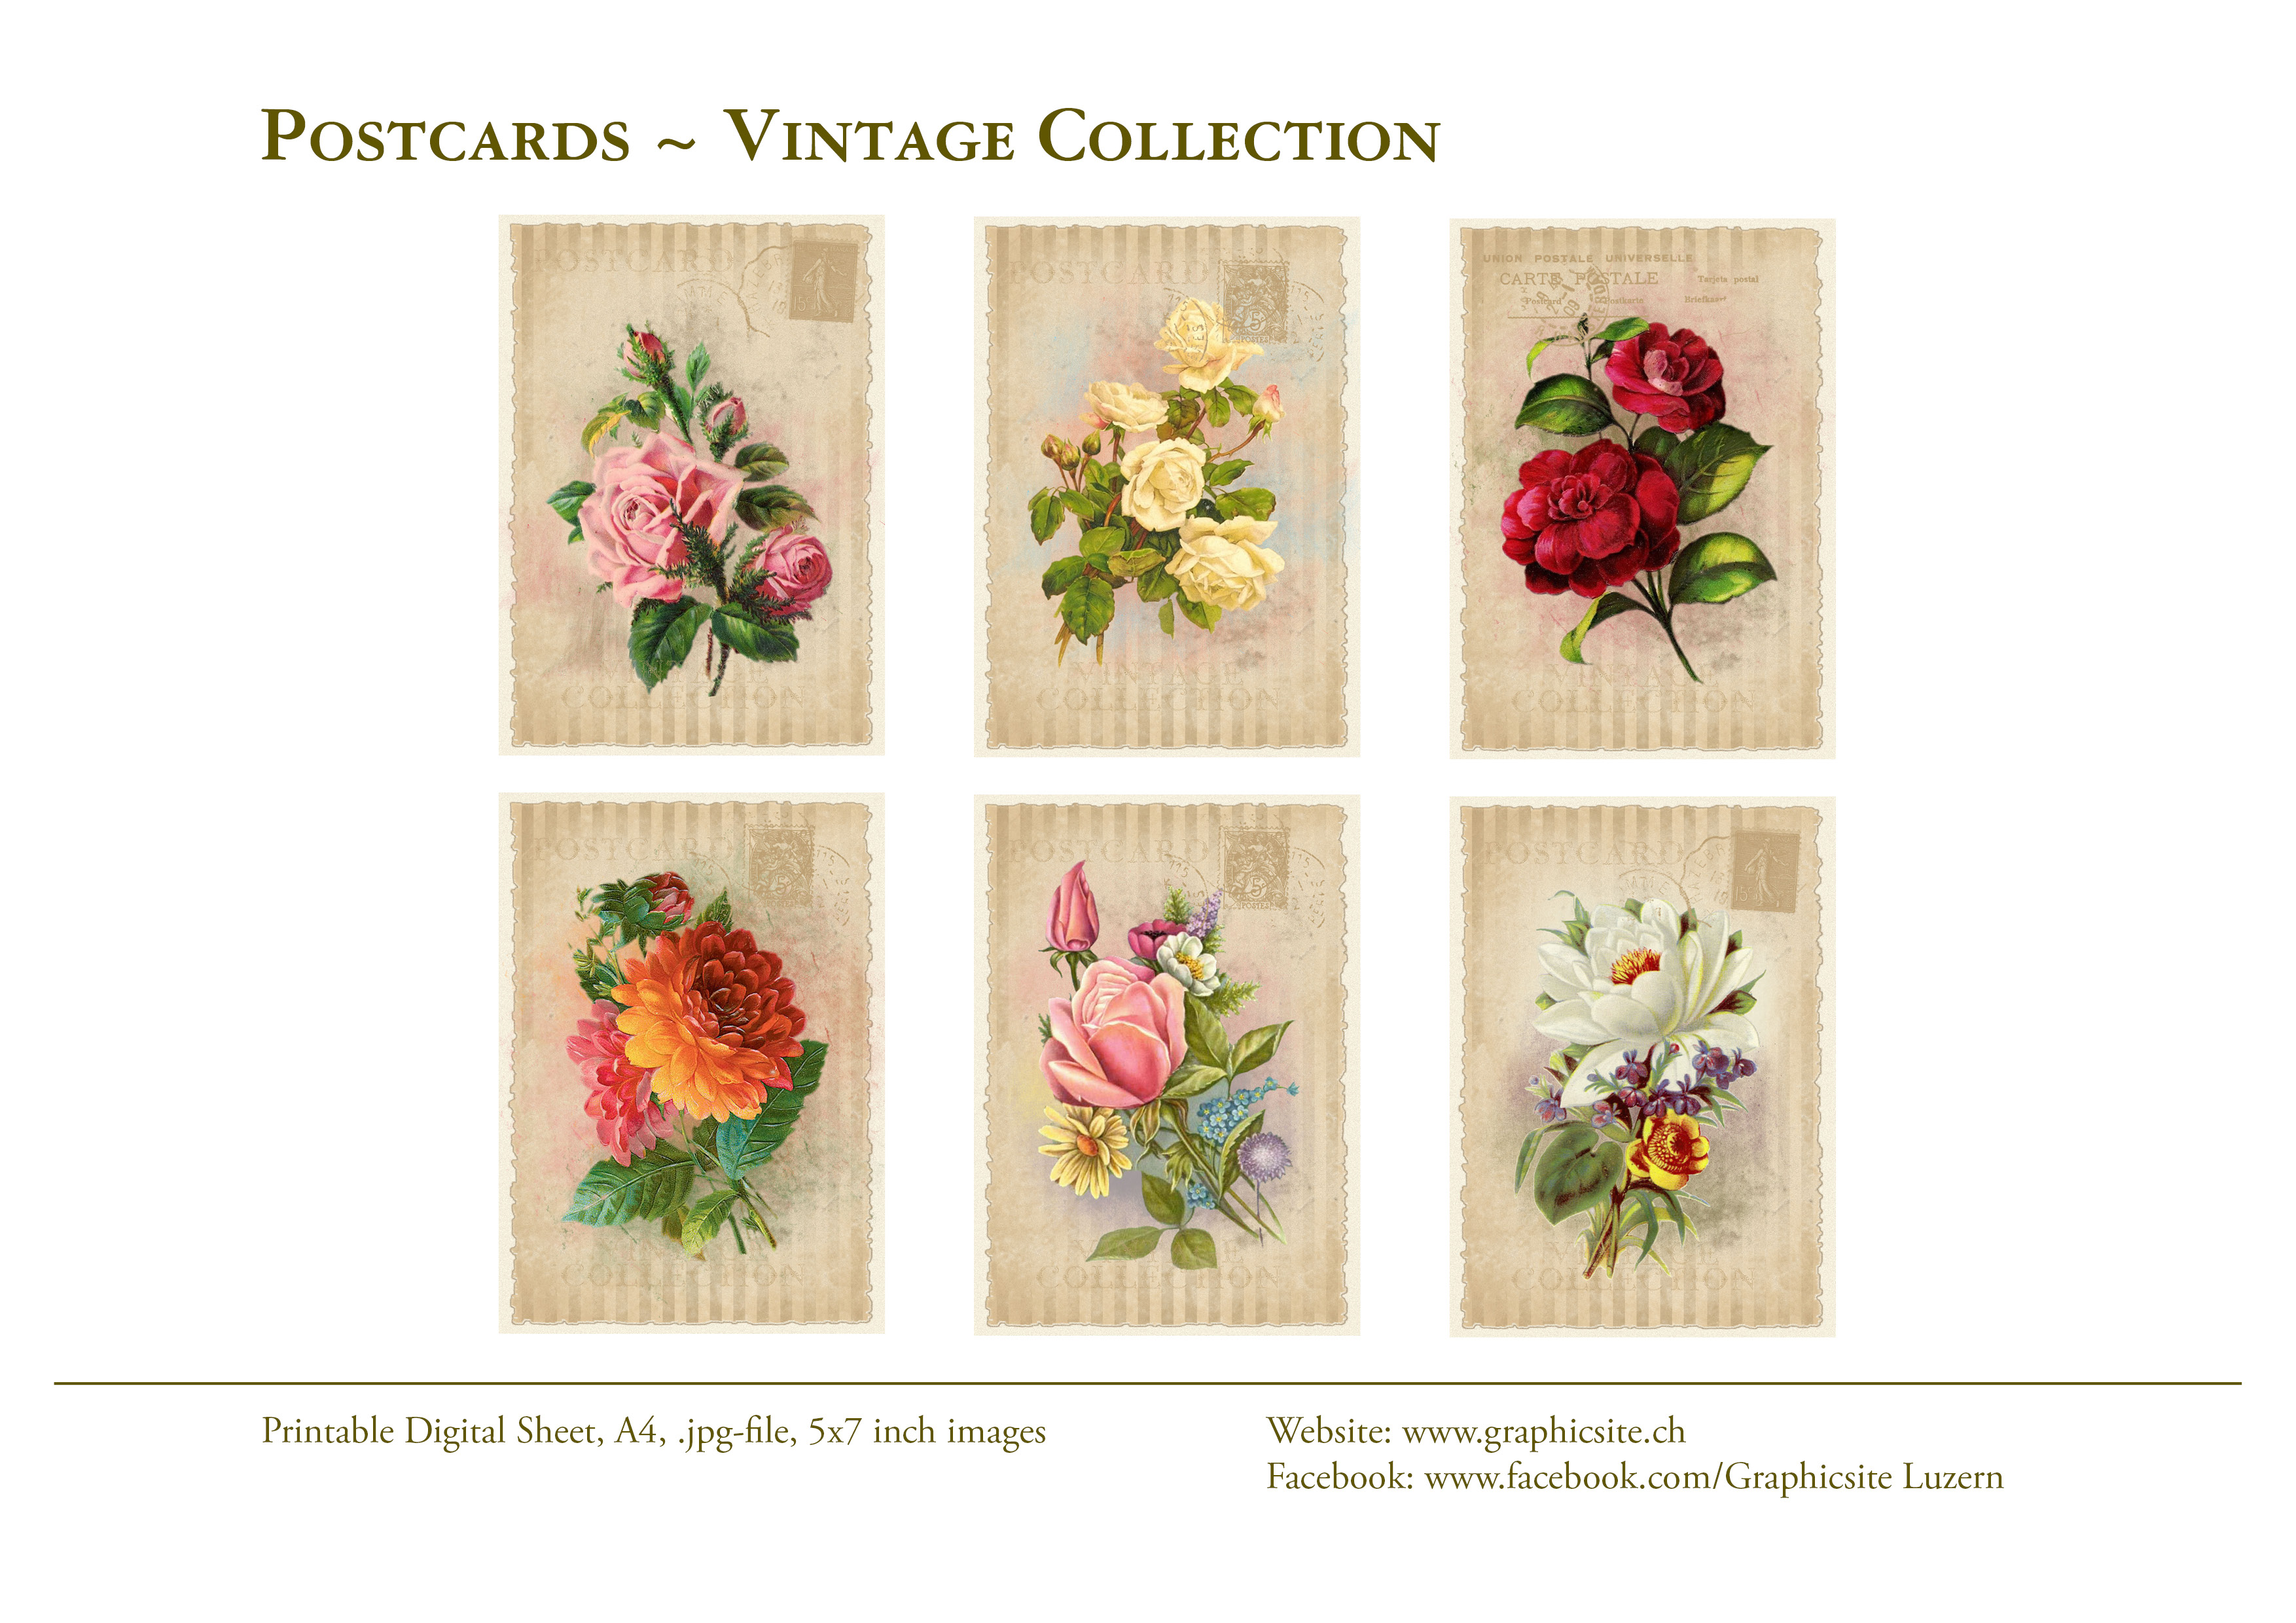 Printable Digital Sheets - DIN A-Formats - Postcards Vintage Collection - #printable, #digital, #sheets, #instant, #download, #cards, #postcards, #greetingcards, #flowers, #roses